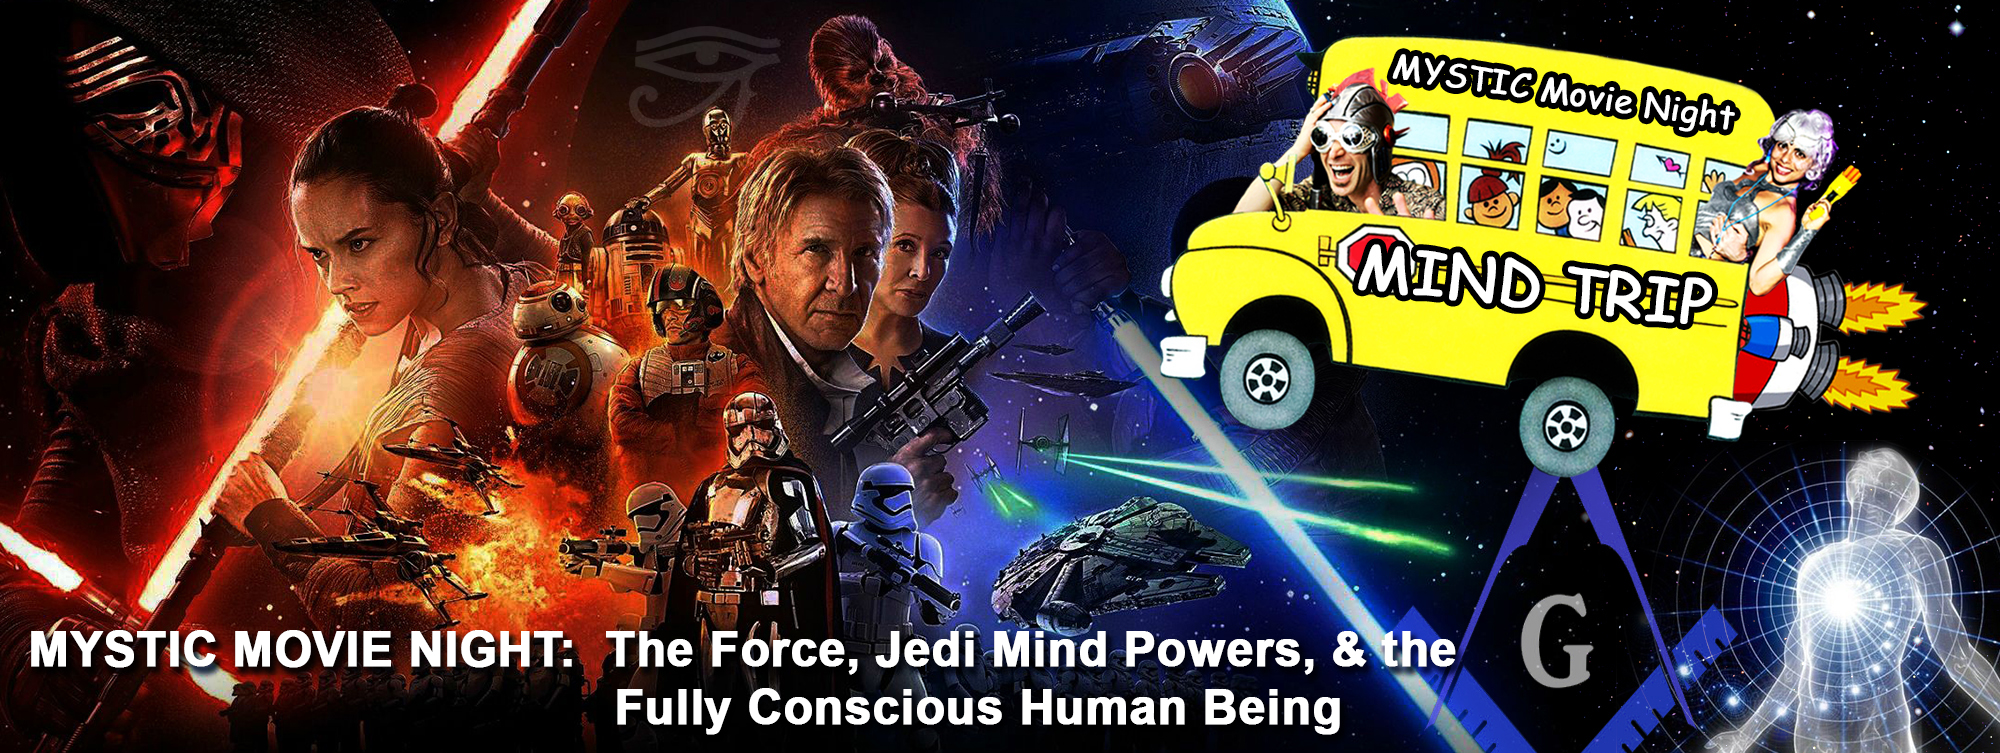 FB Banner The Force and Jedi Mystic Movie Night with TITLE.jpg